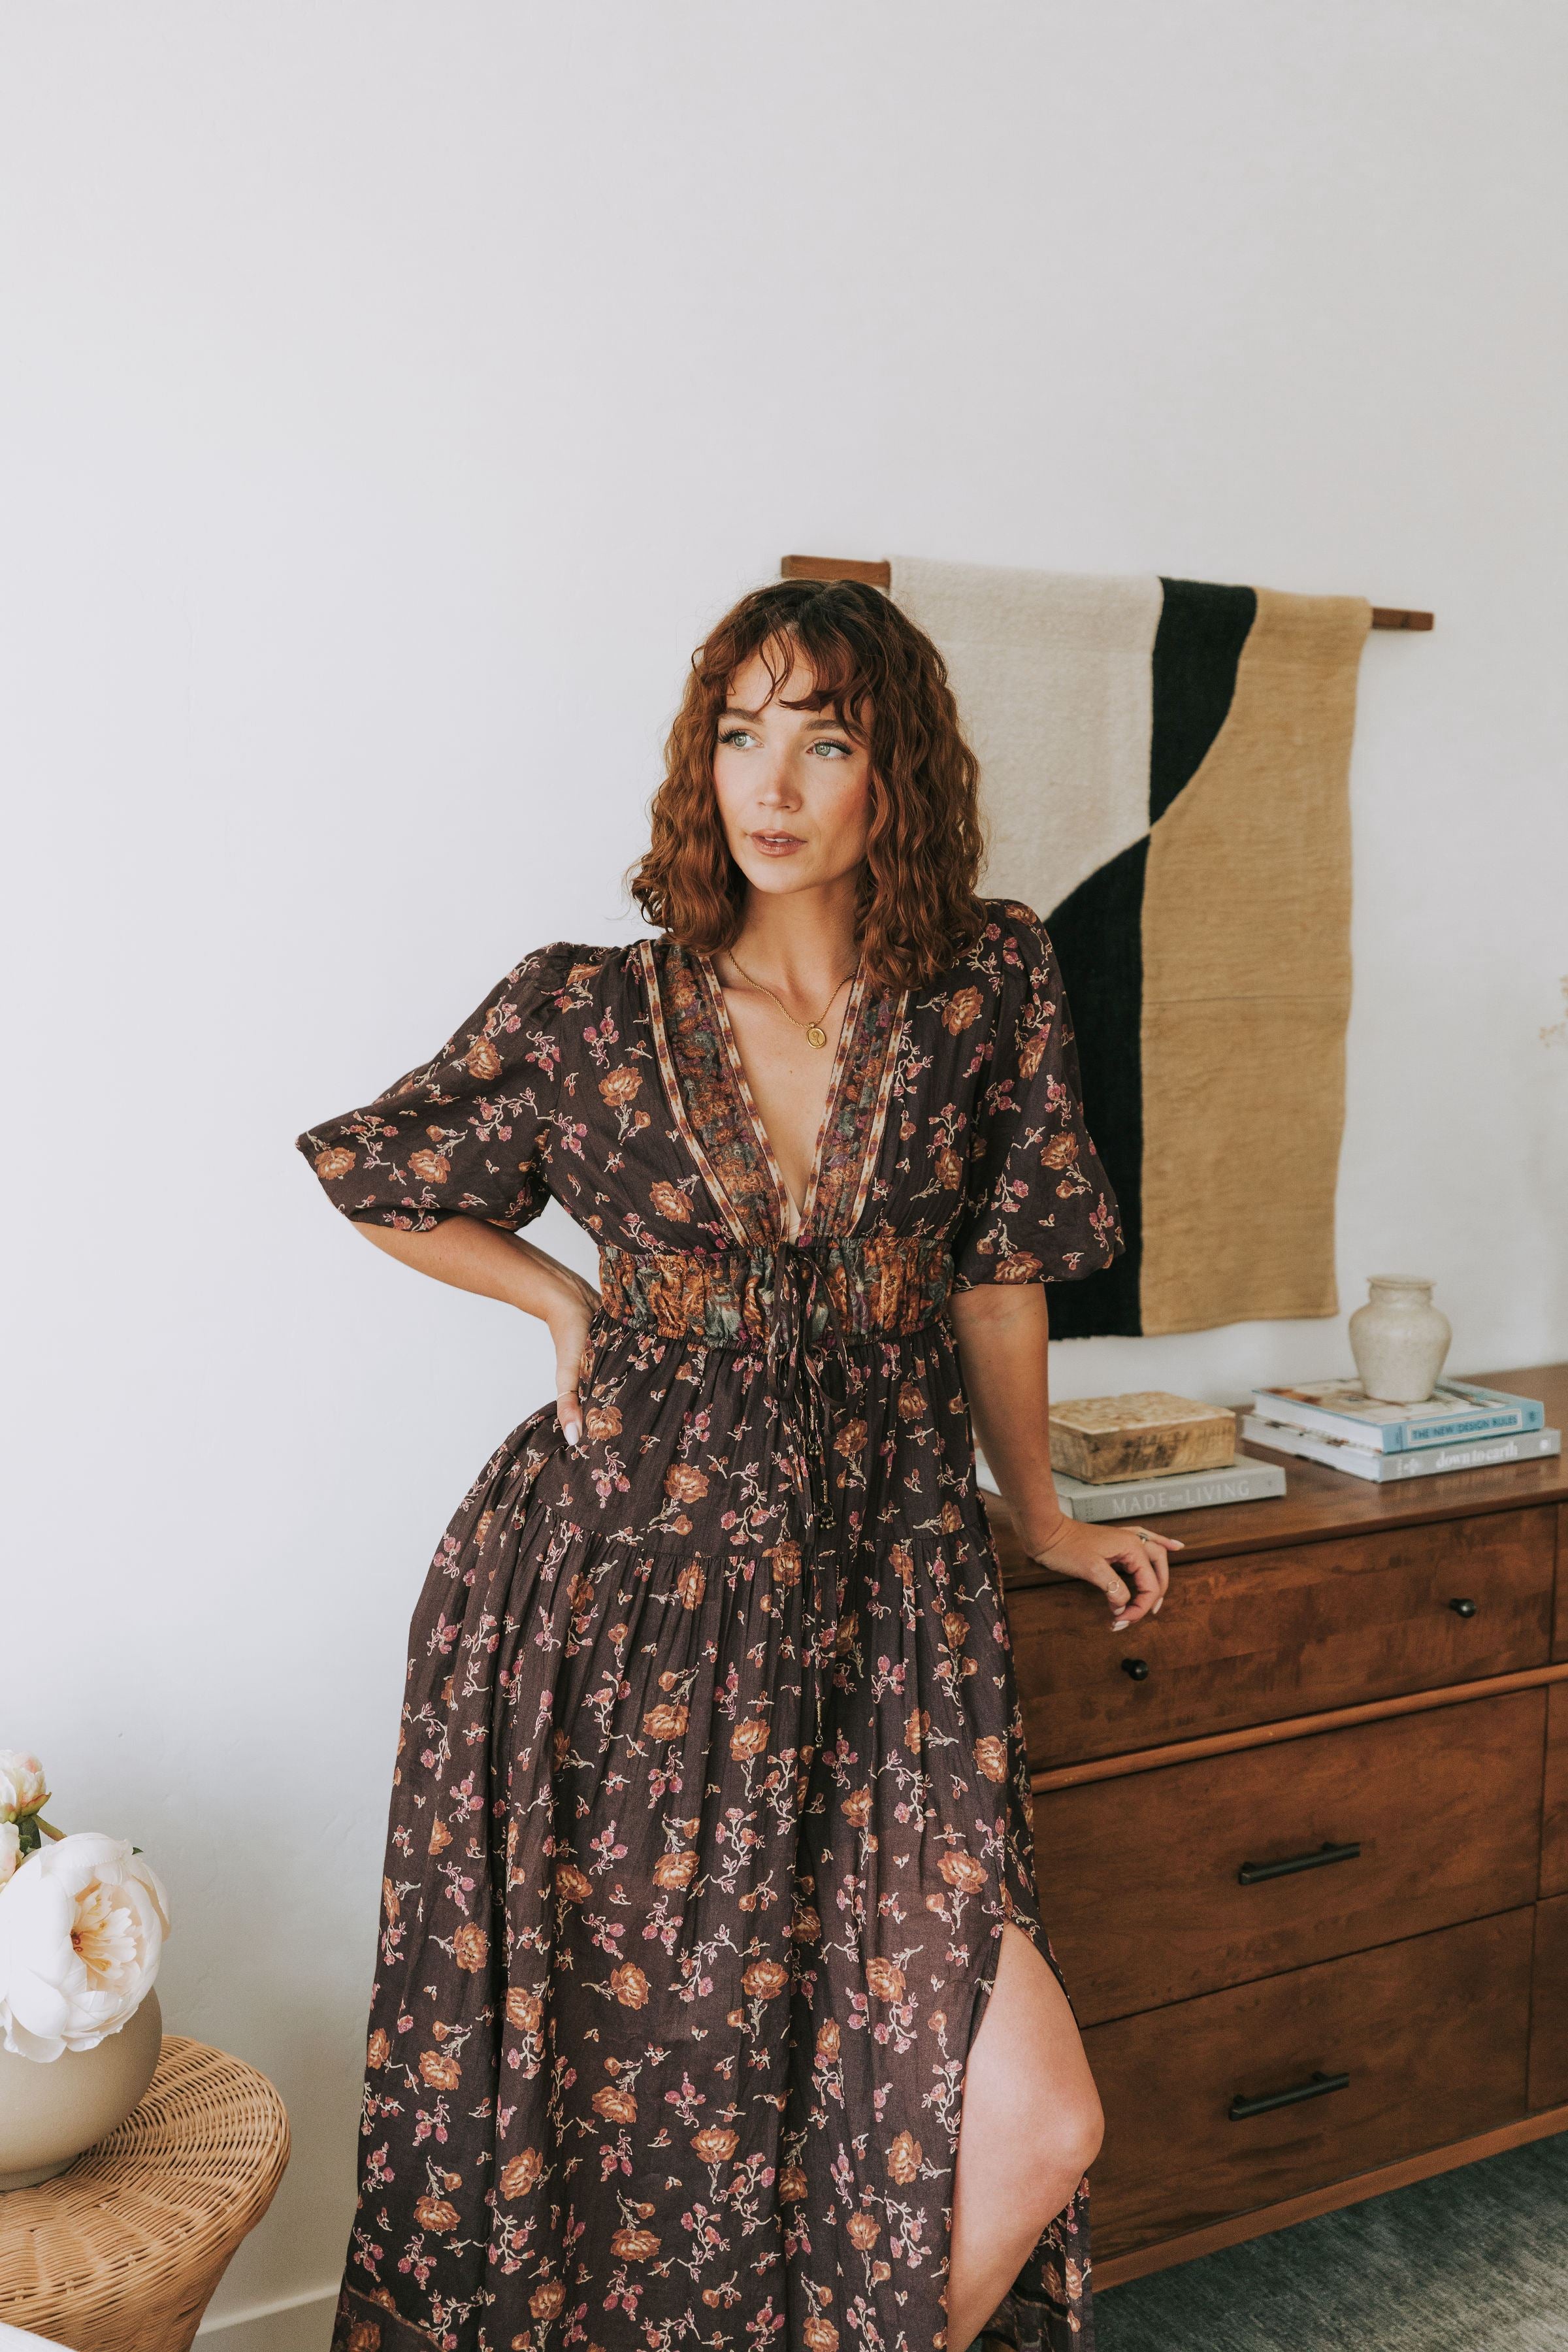 FREE PEOPLE - Lysette Maxi Dress